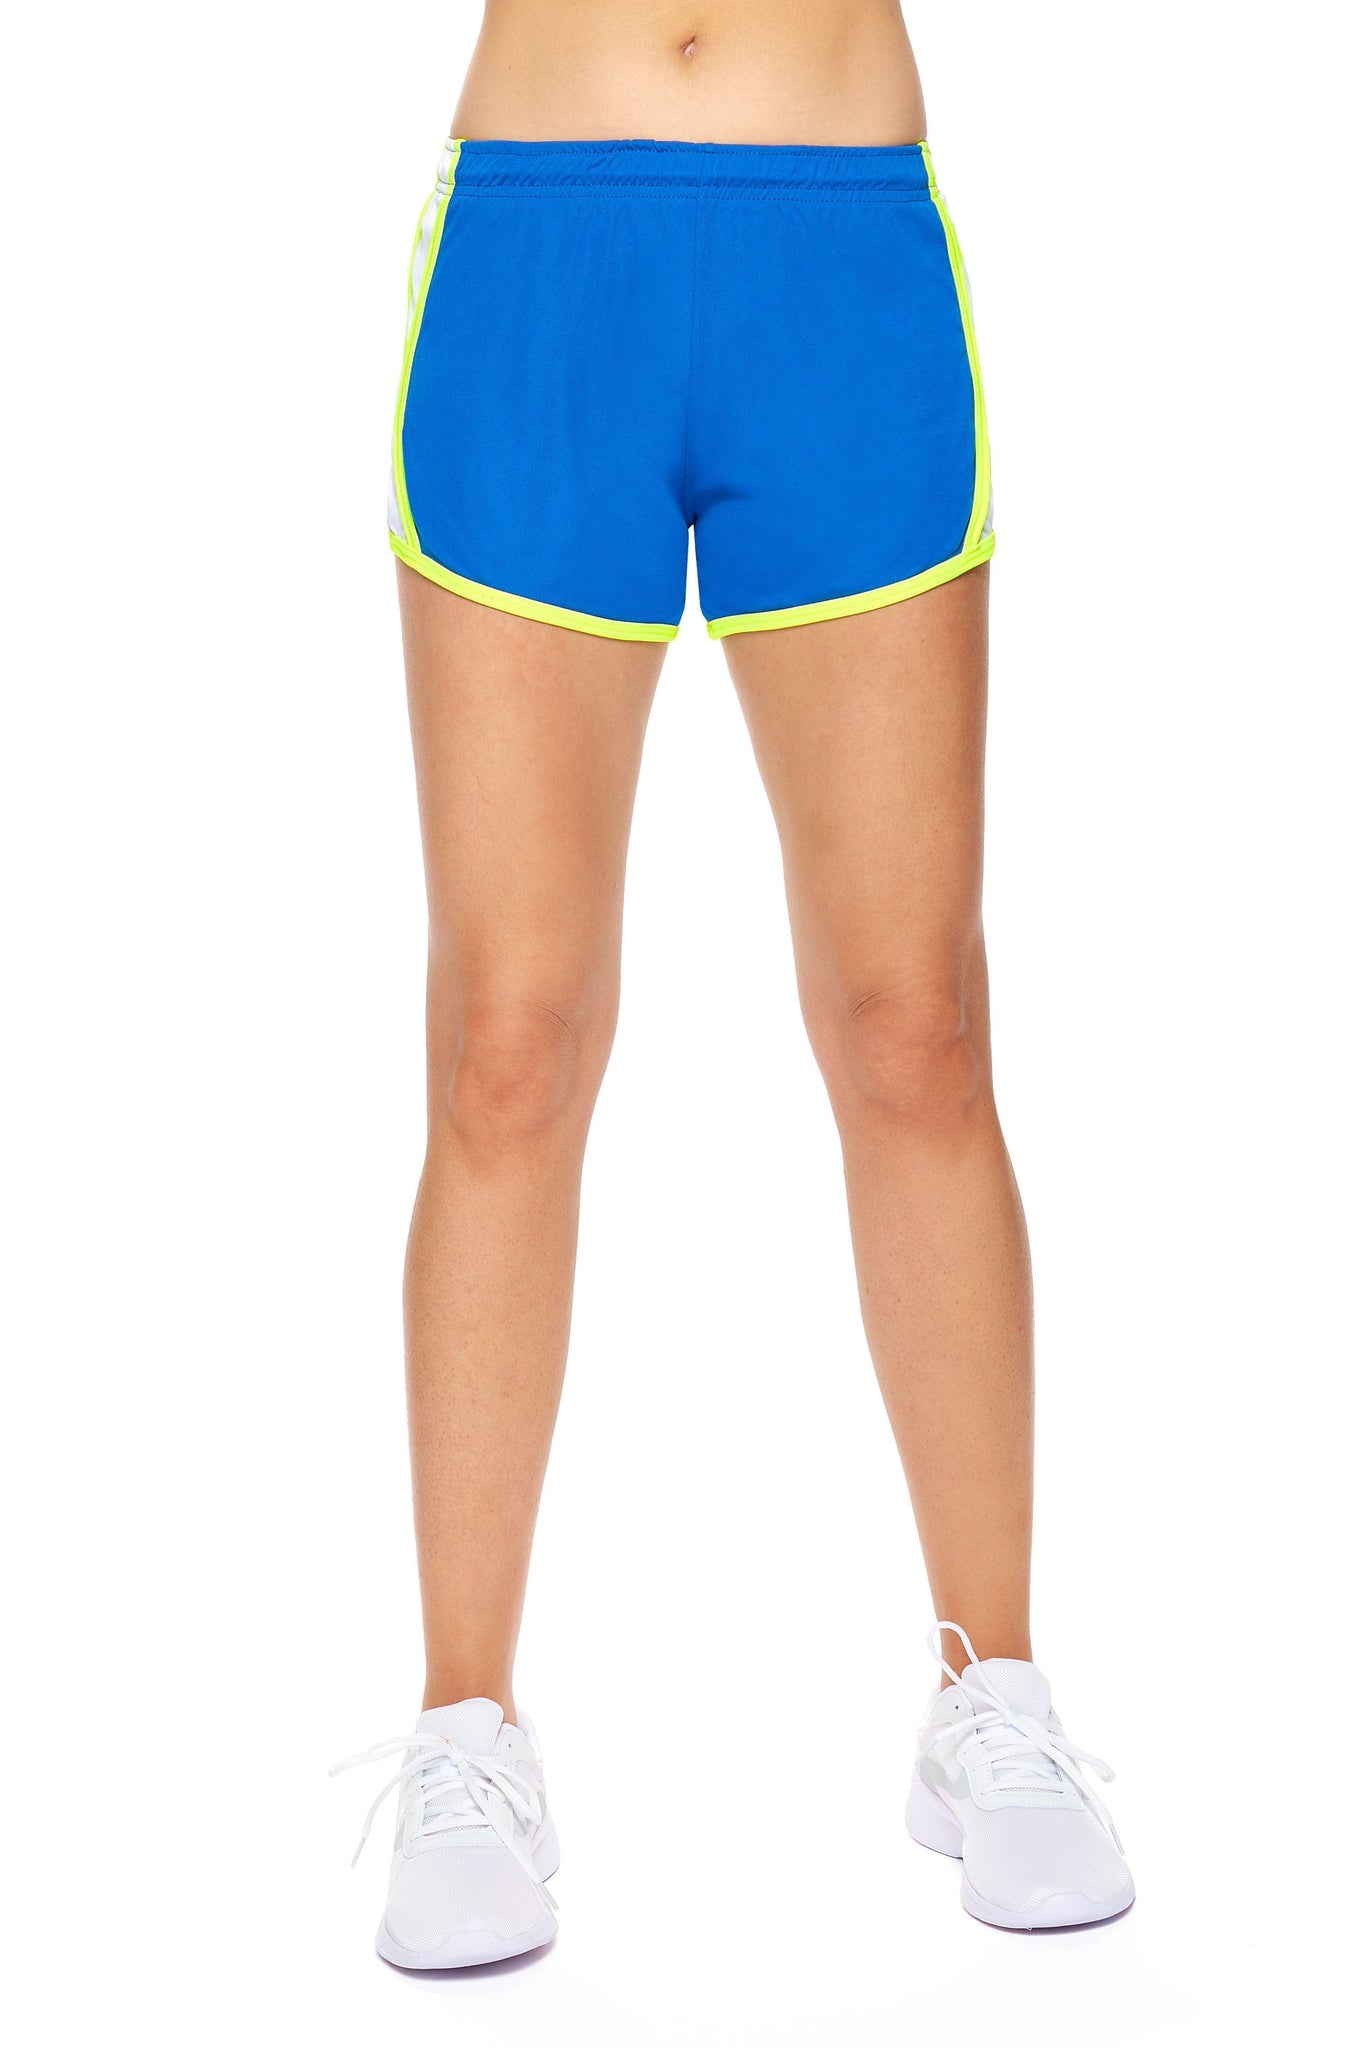 Expert Brand Wholesale Women's DriMax Go Active Shorts Made in USA AI1046 royal blue image 2#royal-blue